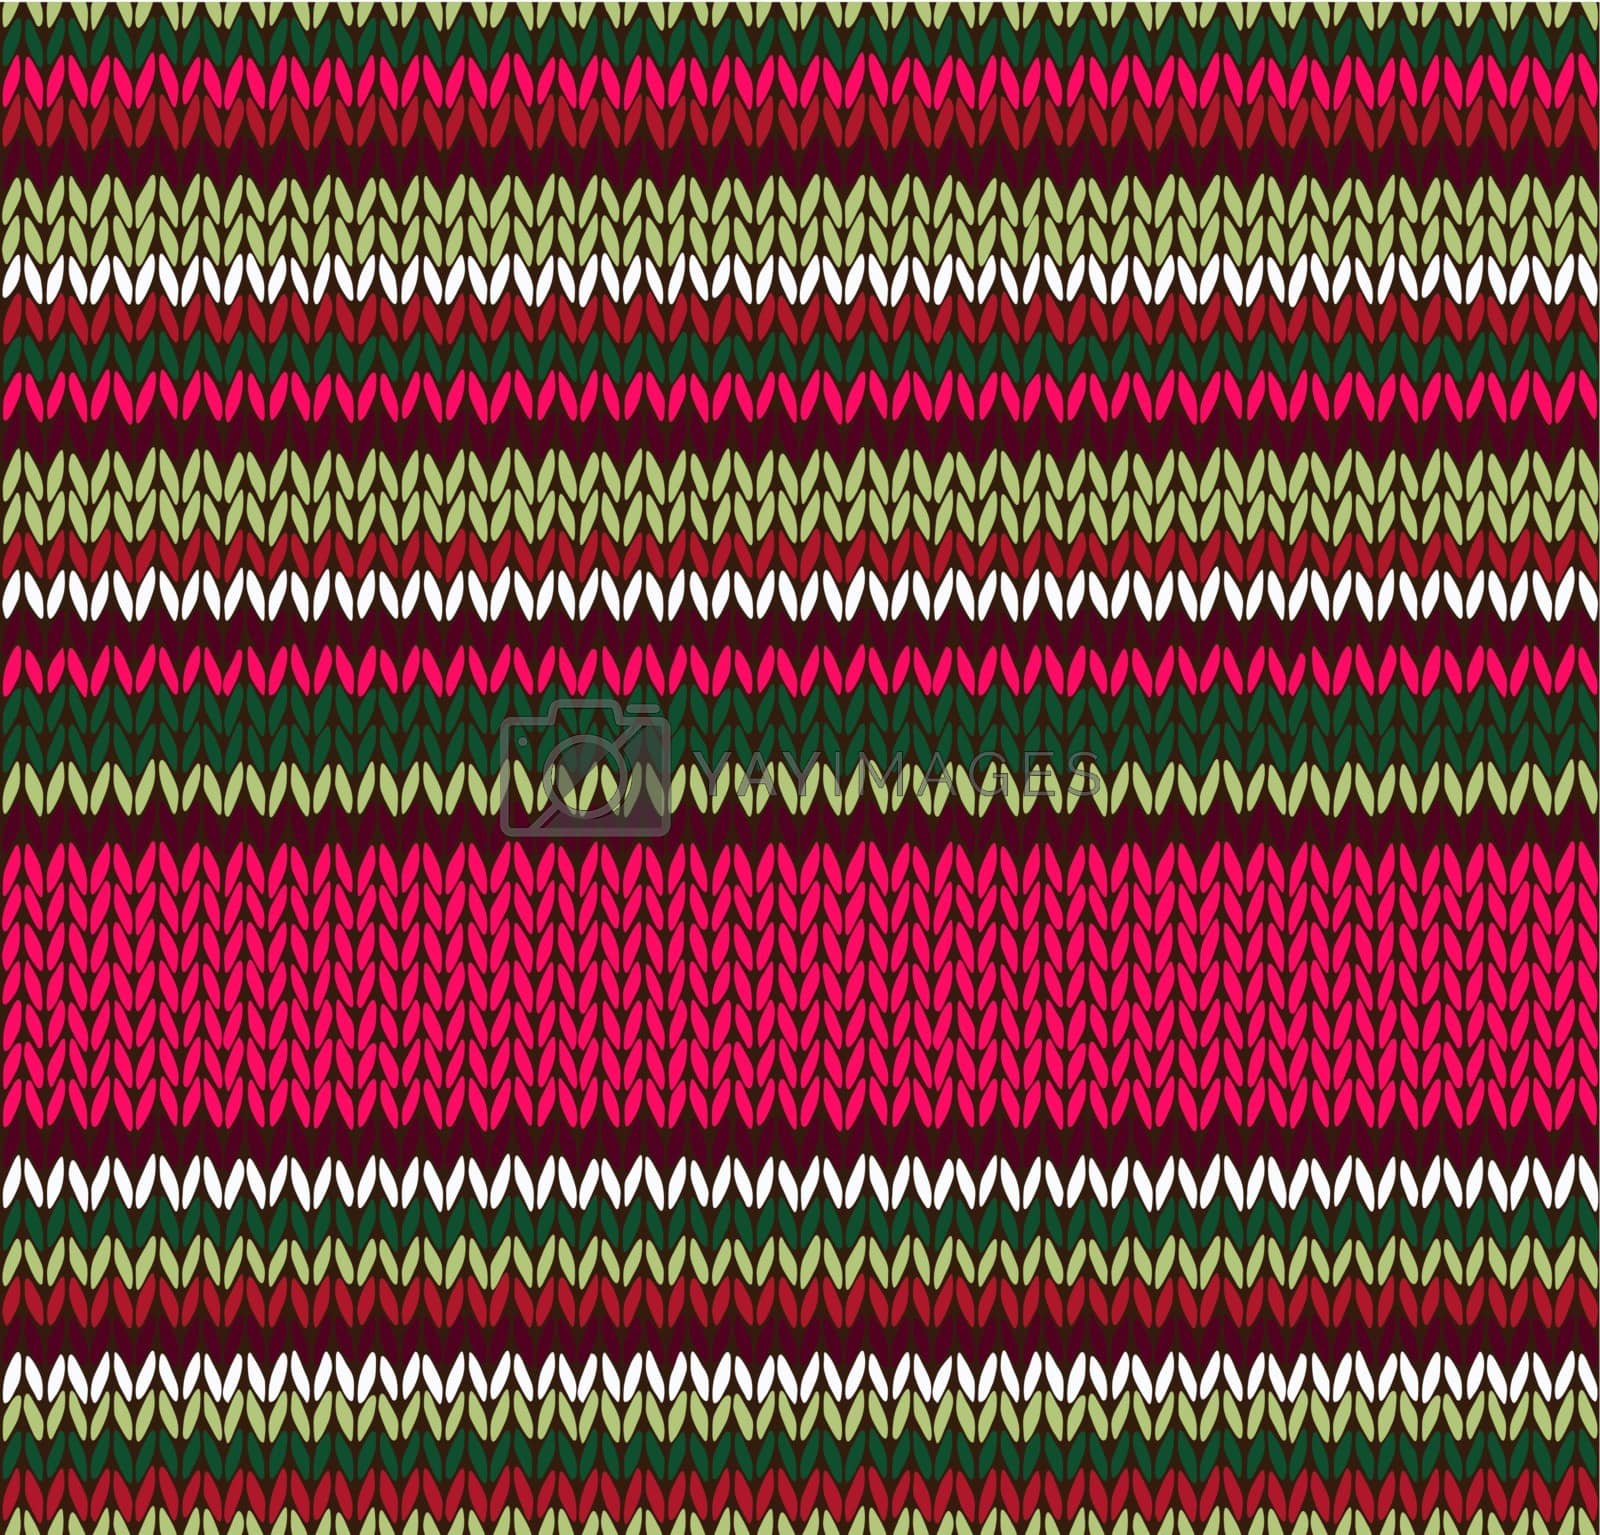 Royalty free image of Style Seamless Knitted Pattern. Red Pink Green White Color Illus by ESSL